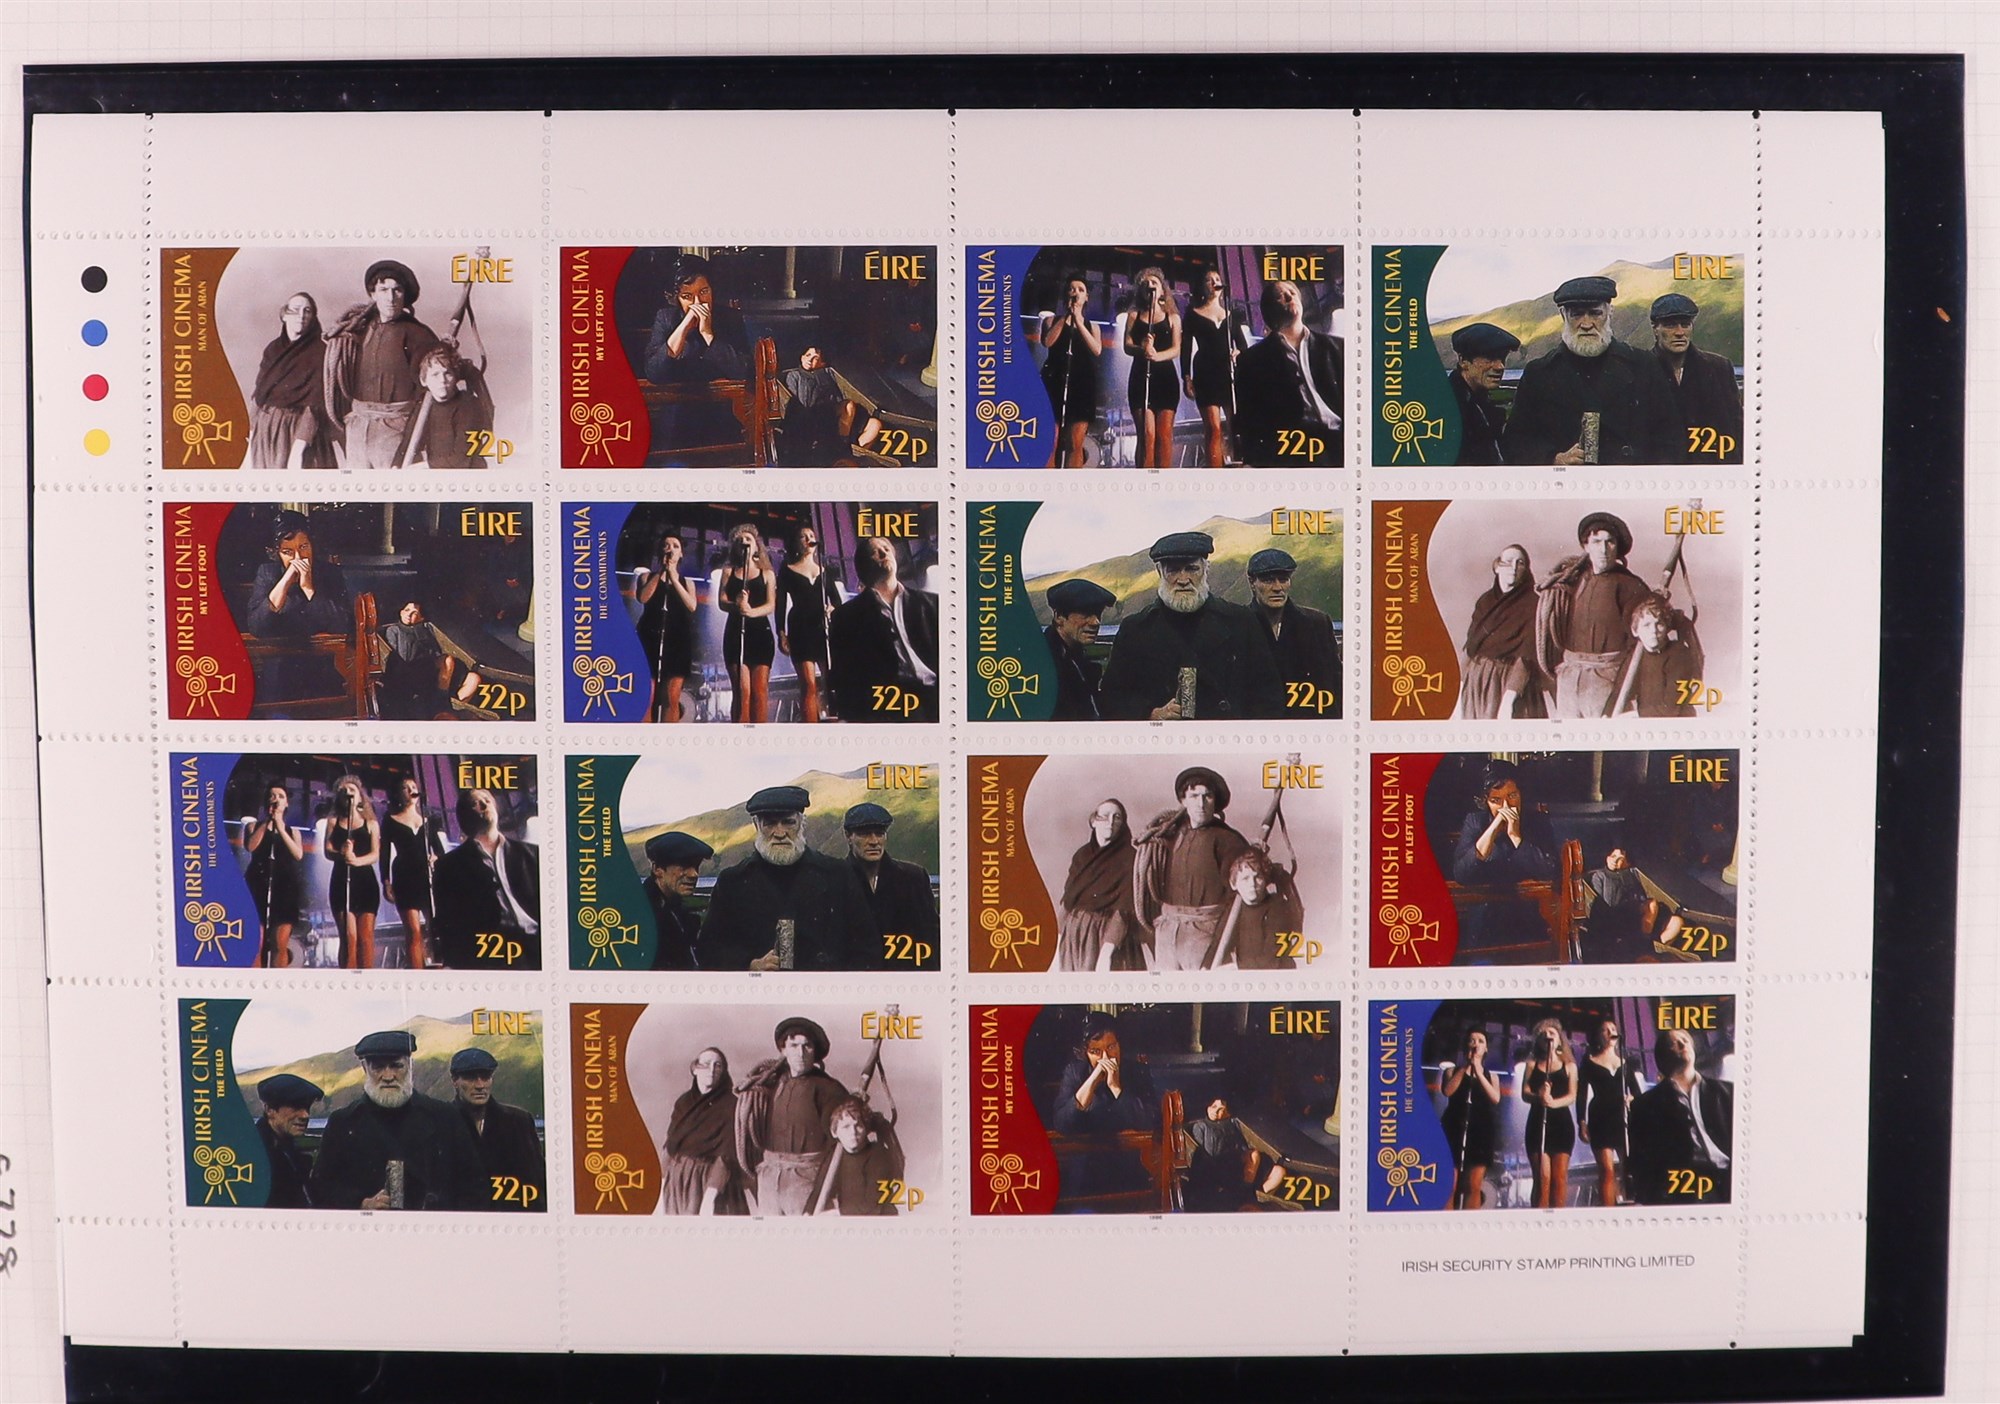 IRELAND 1988-2002 SHEETLETS NEVER HINGED MINT COLLECTION in album, stc 1,150 Euro. (85+ sheetlets) - Image 2 of 8